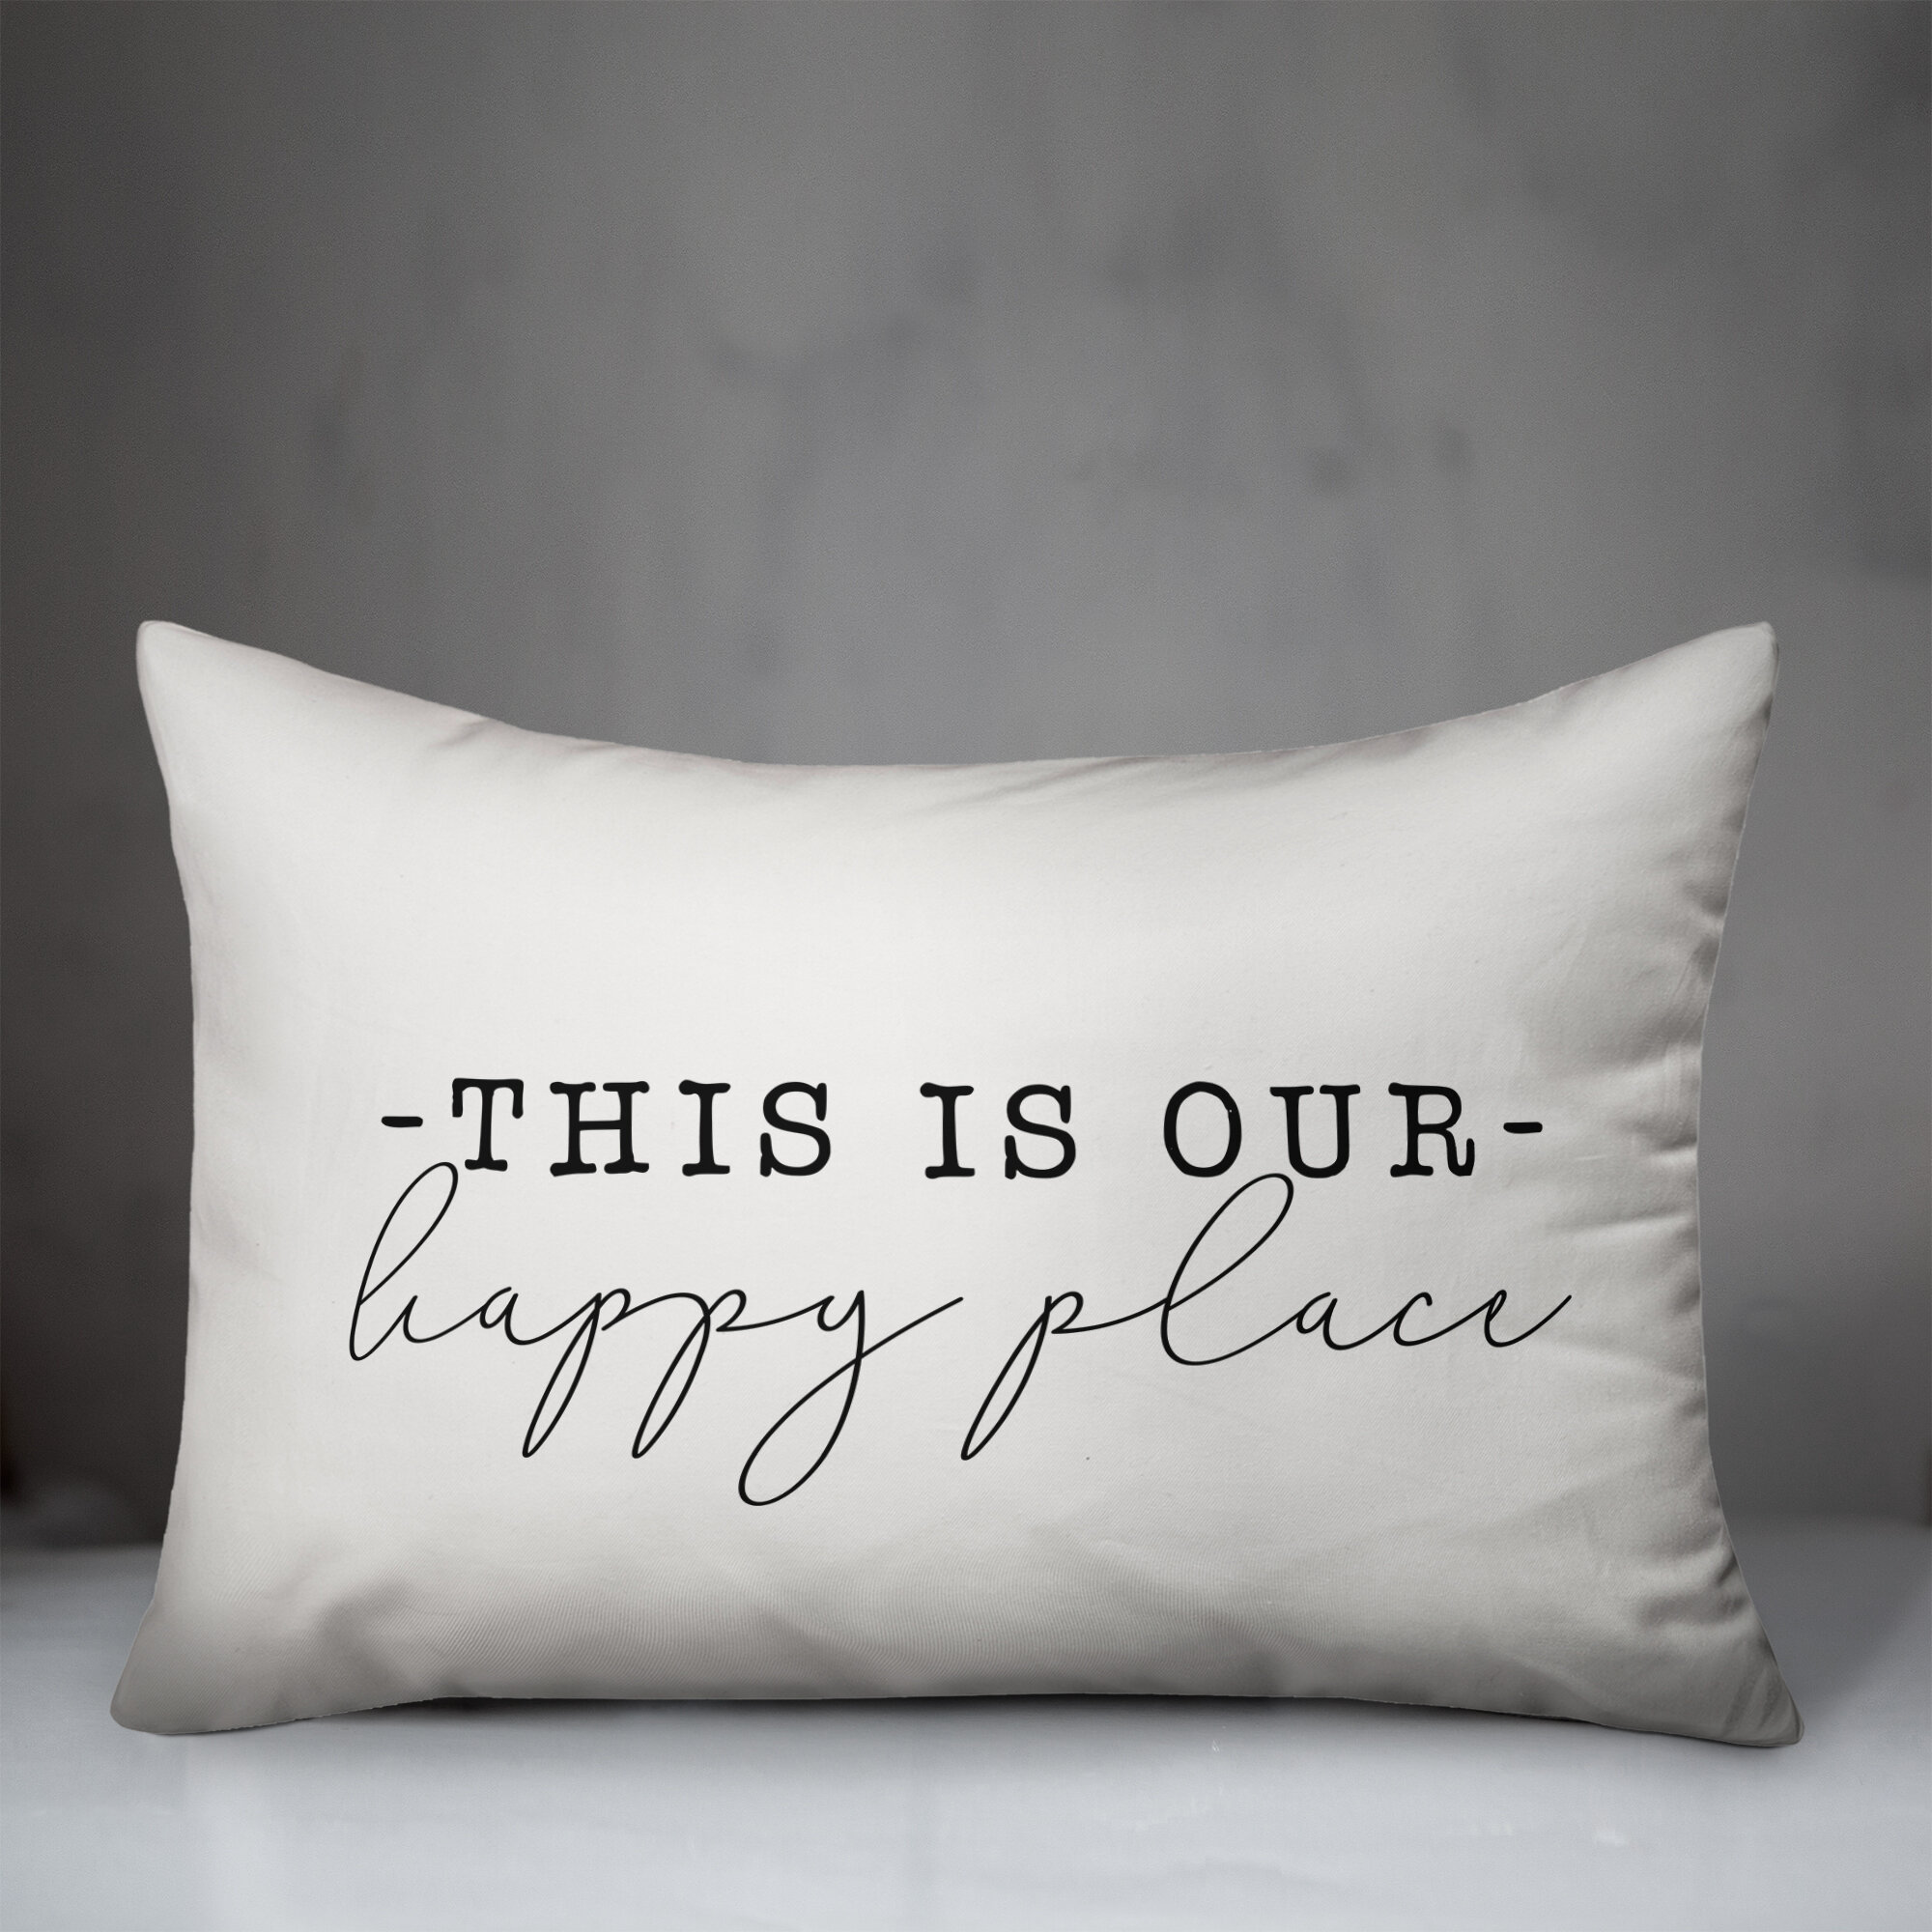 our happy place pillow